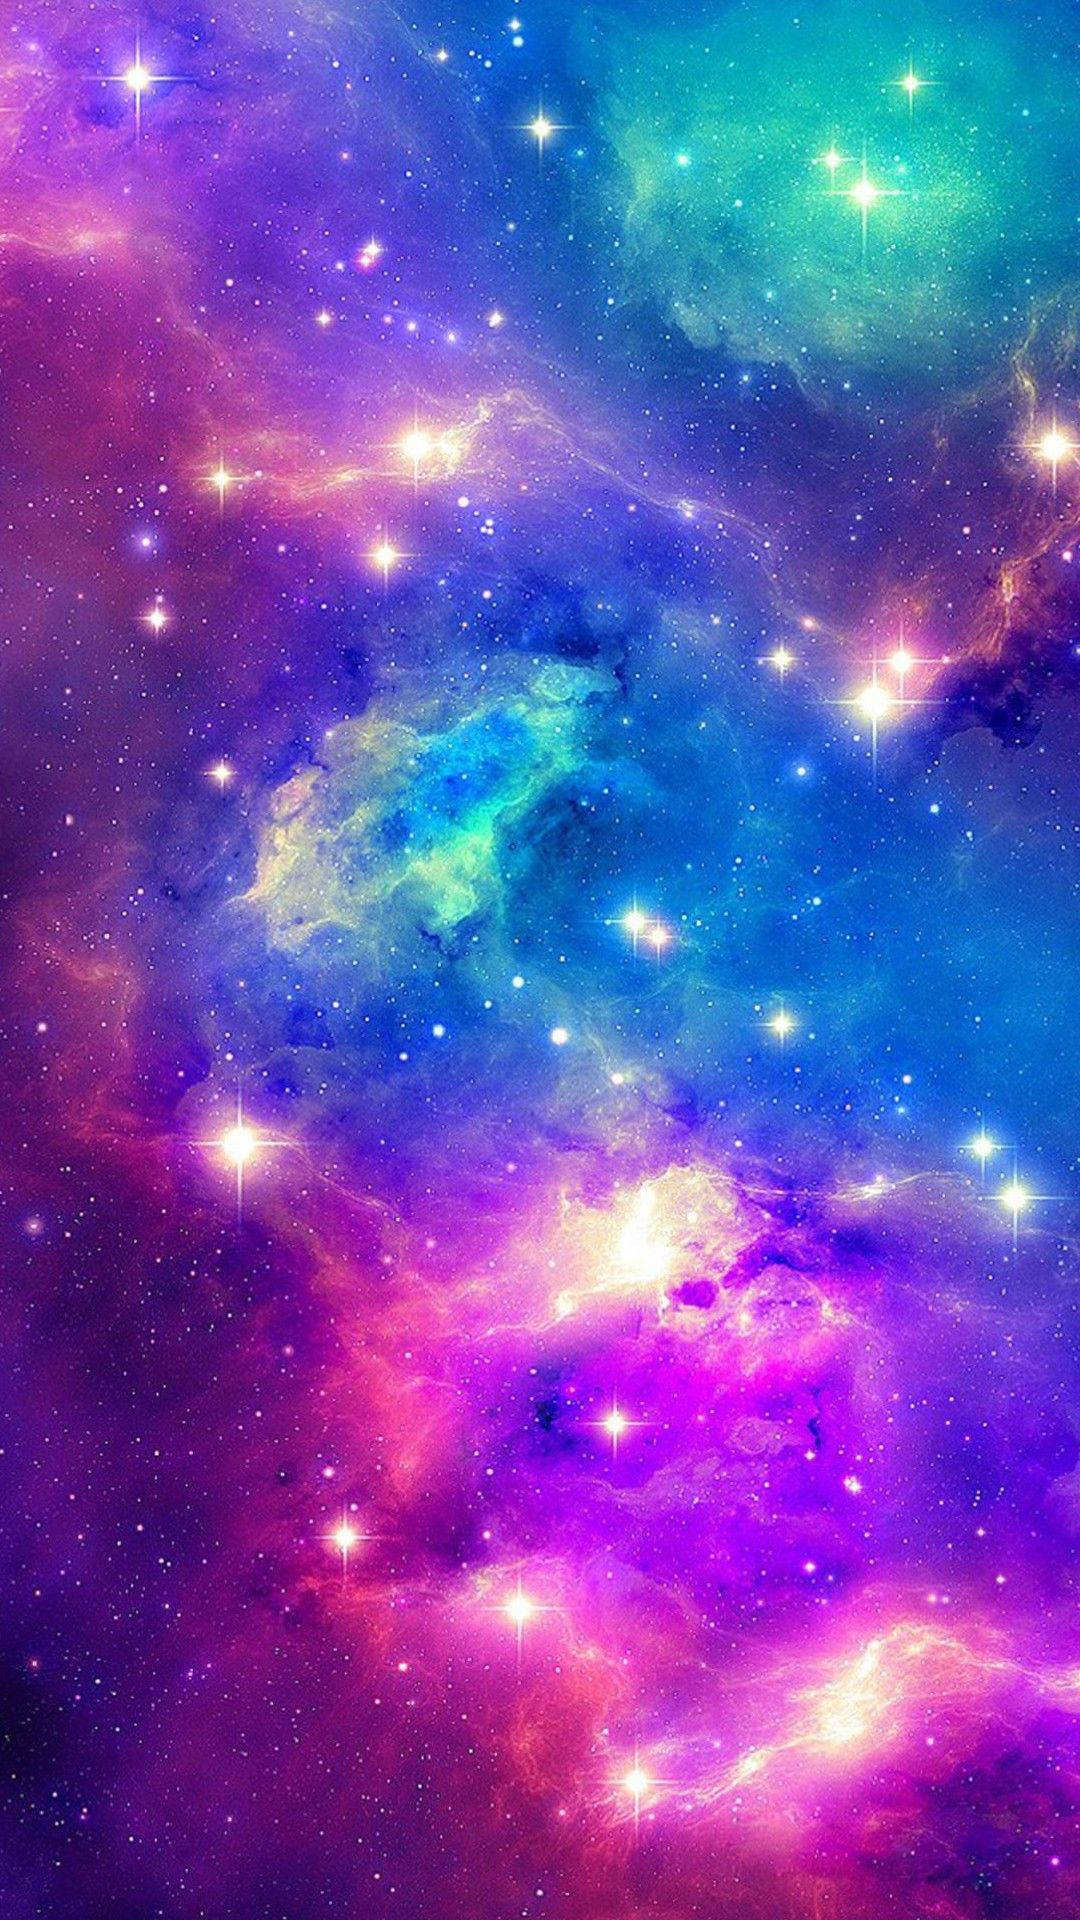 Explore The Stunning Beauty Of The Pink And Purple Cosmic Galaxy. Wallpaper